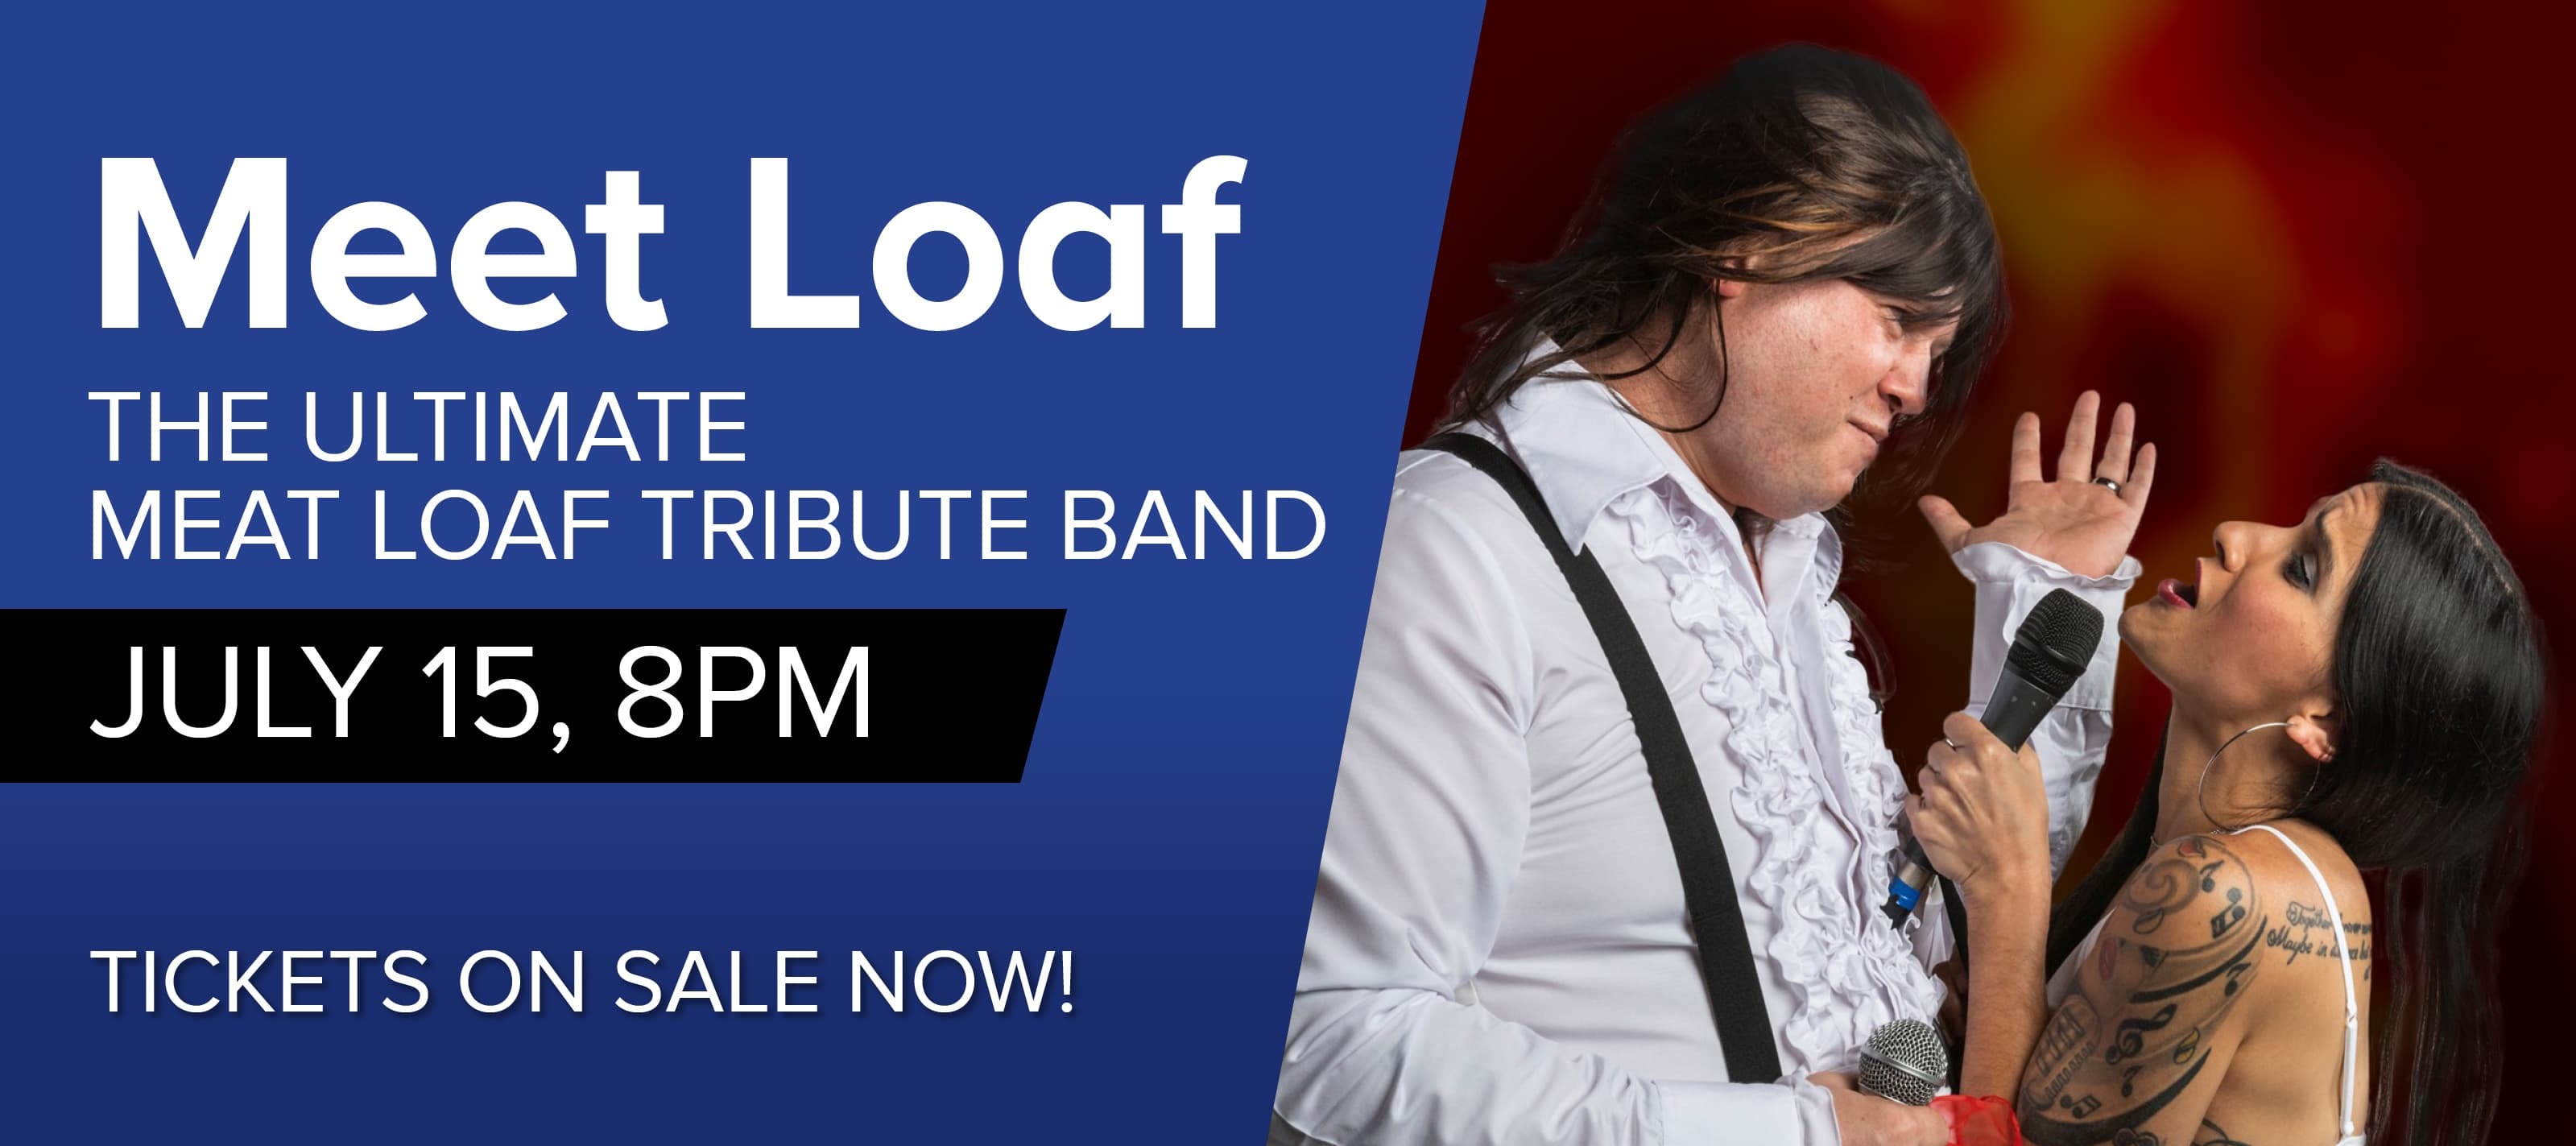 Meet Loaf The Ultimate Meat Loaf Tribute Band July 15 8pm Tickets On Sale Now